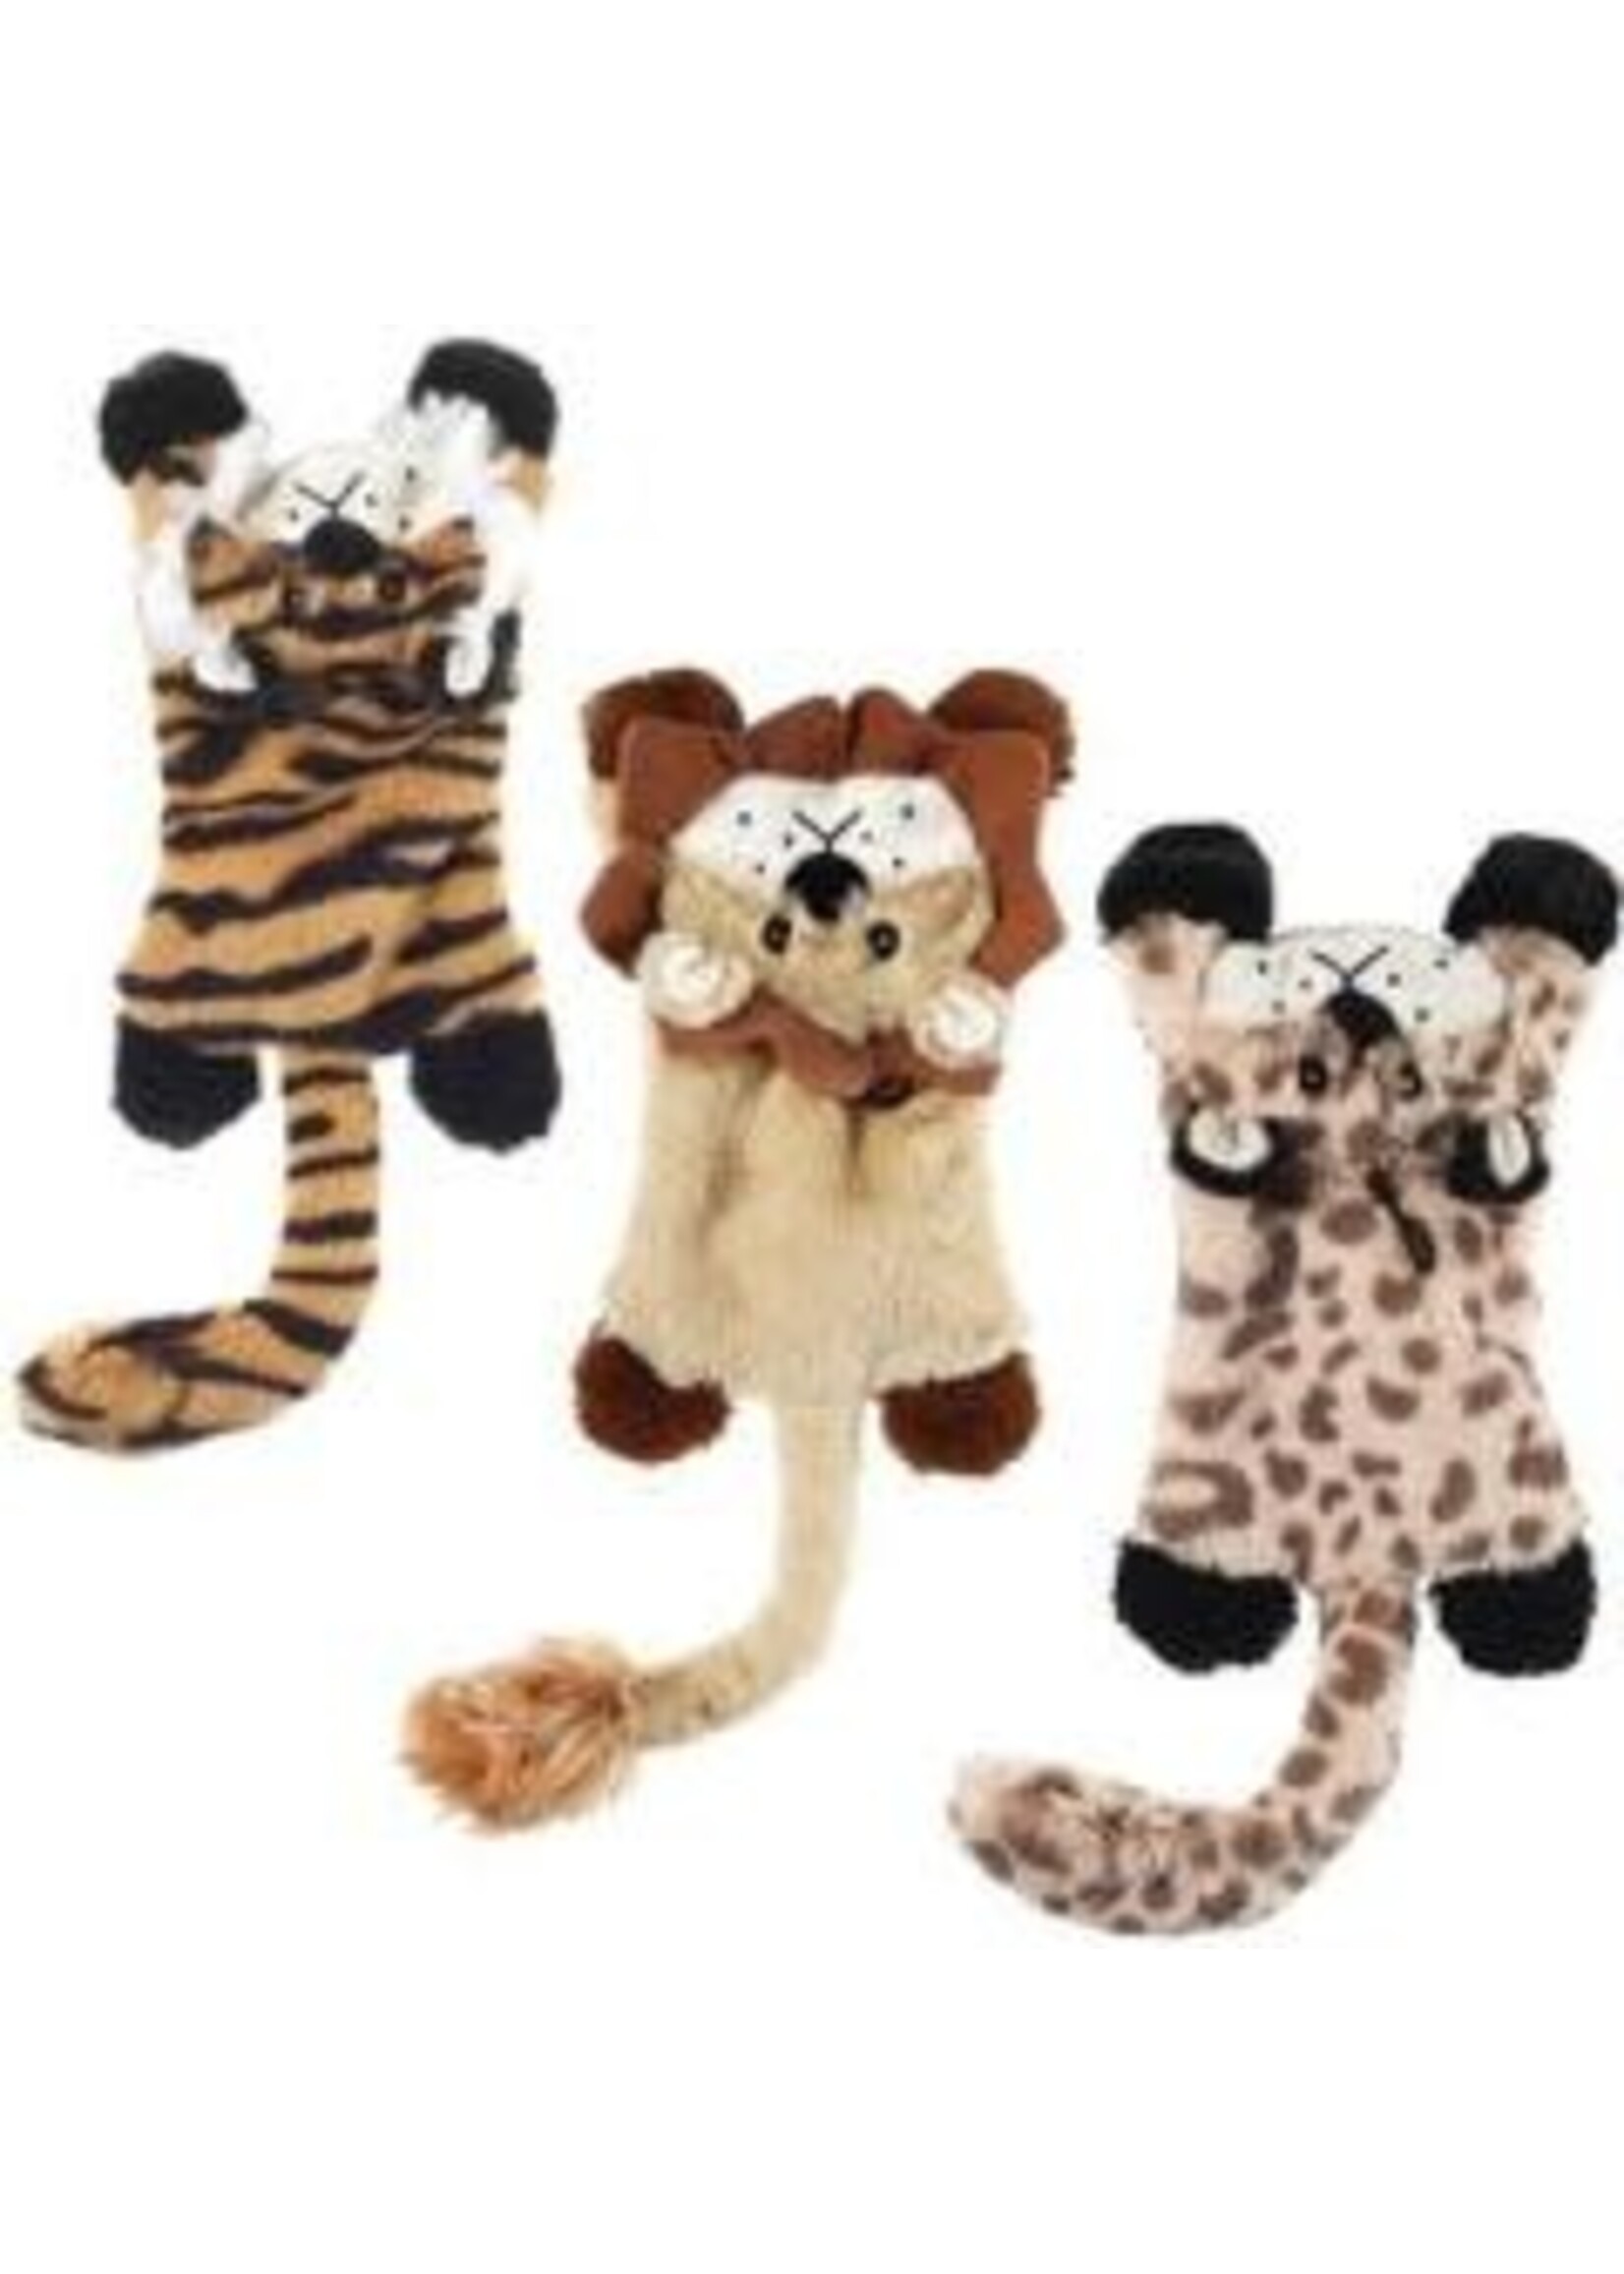 Ethical Ethical - Skinneeez Flat Cats Jungle 14" (Assorted)